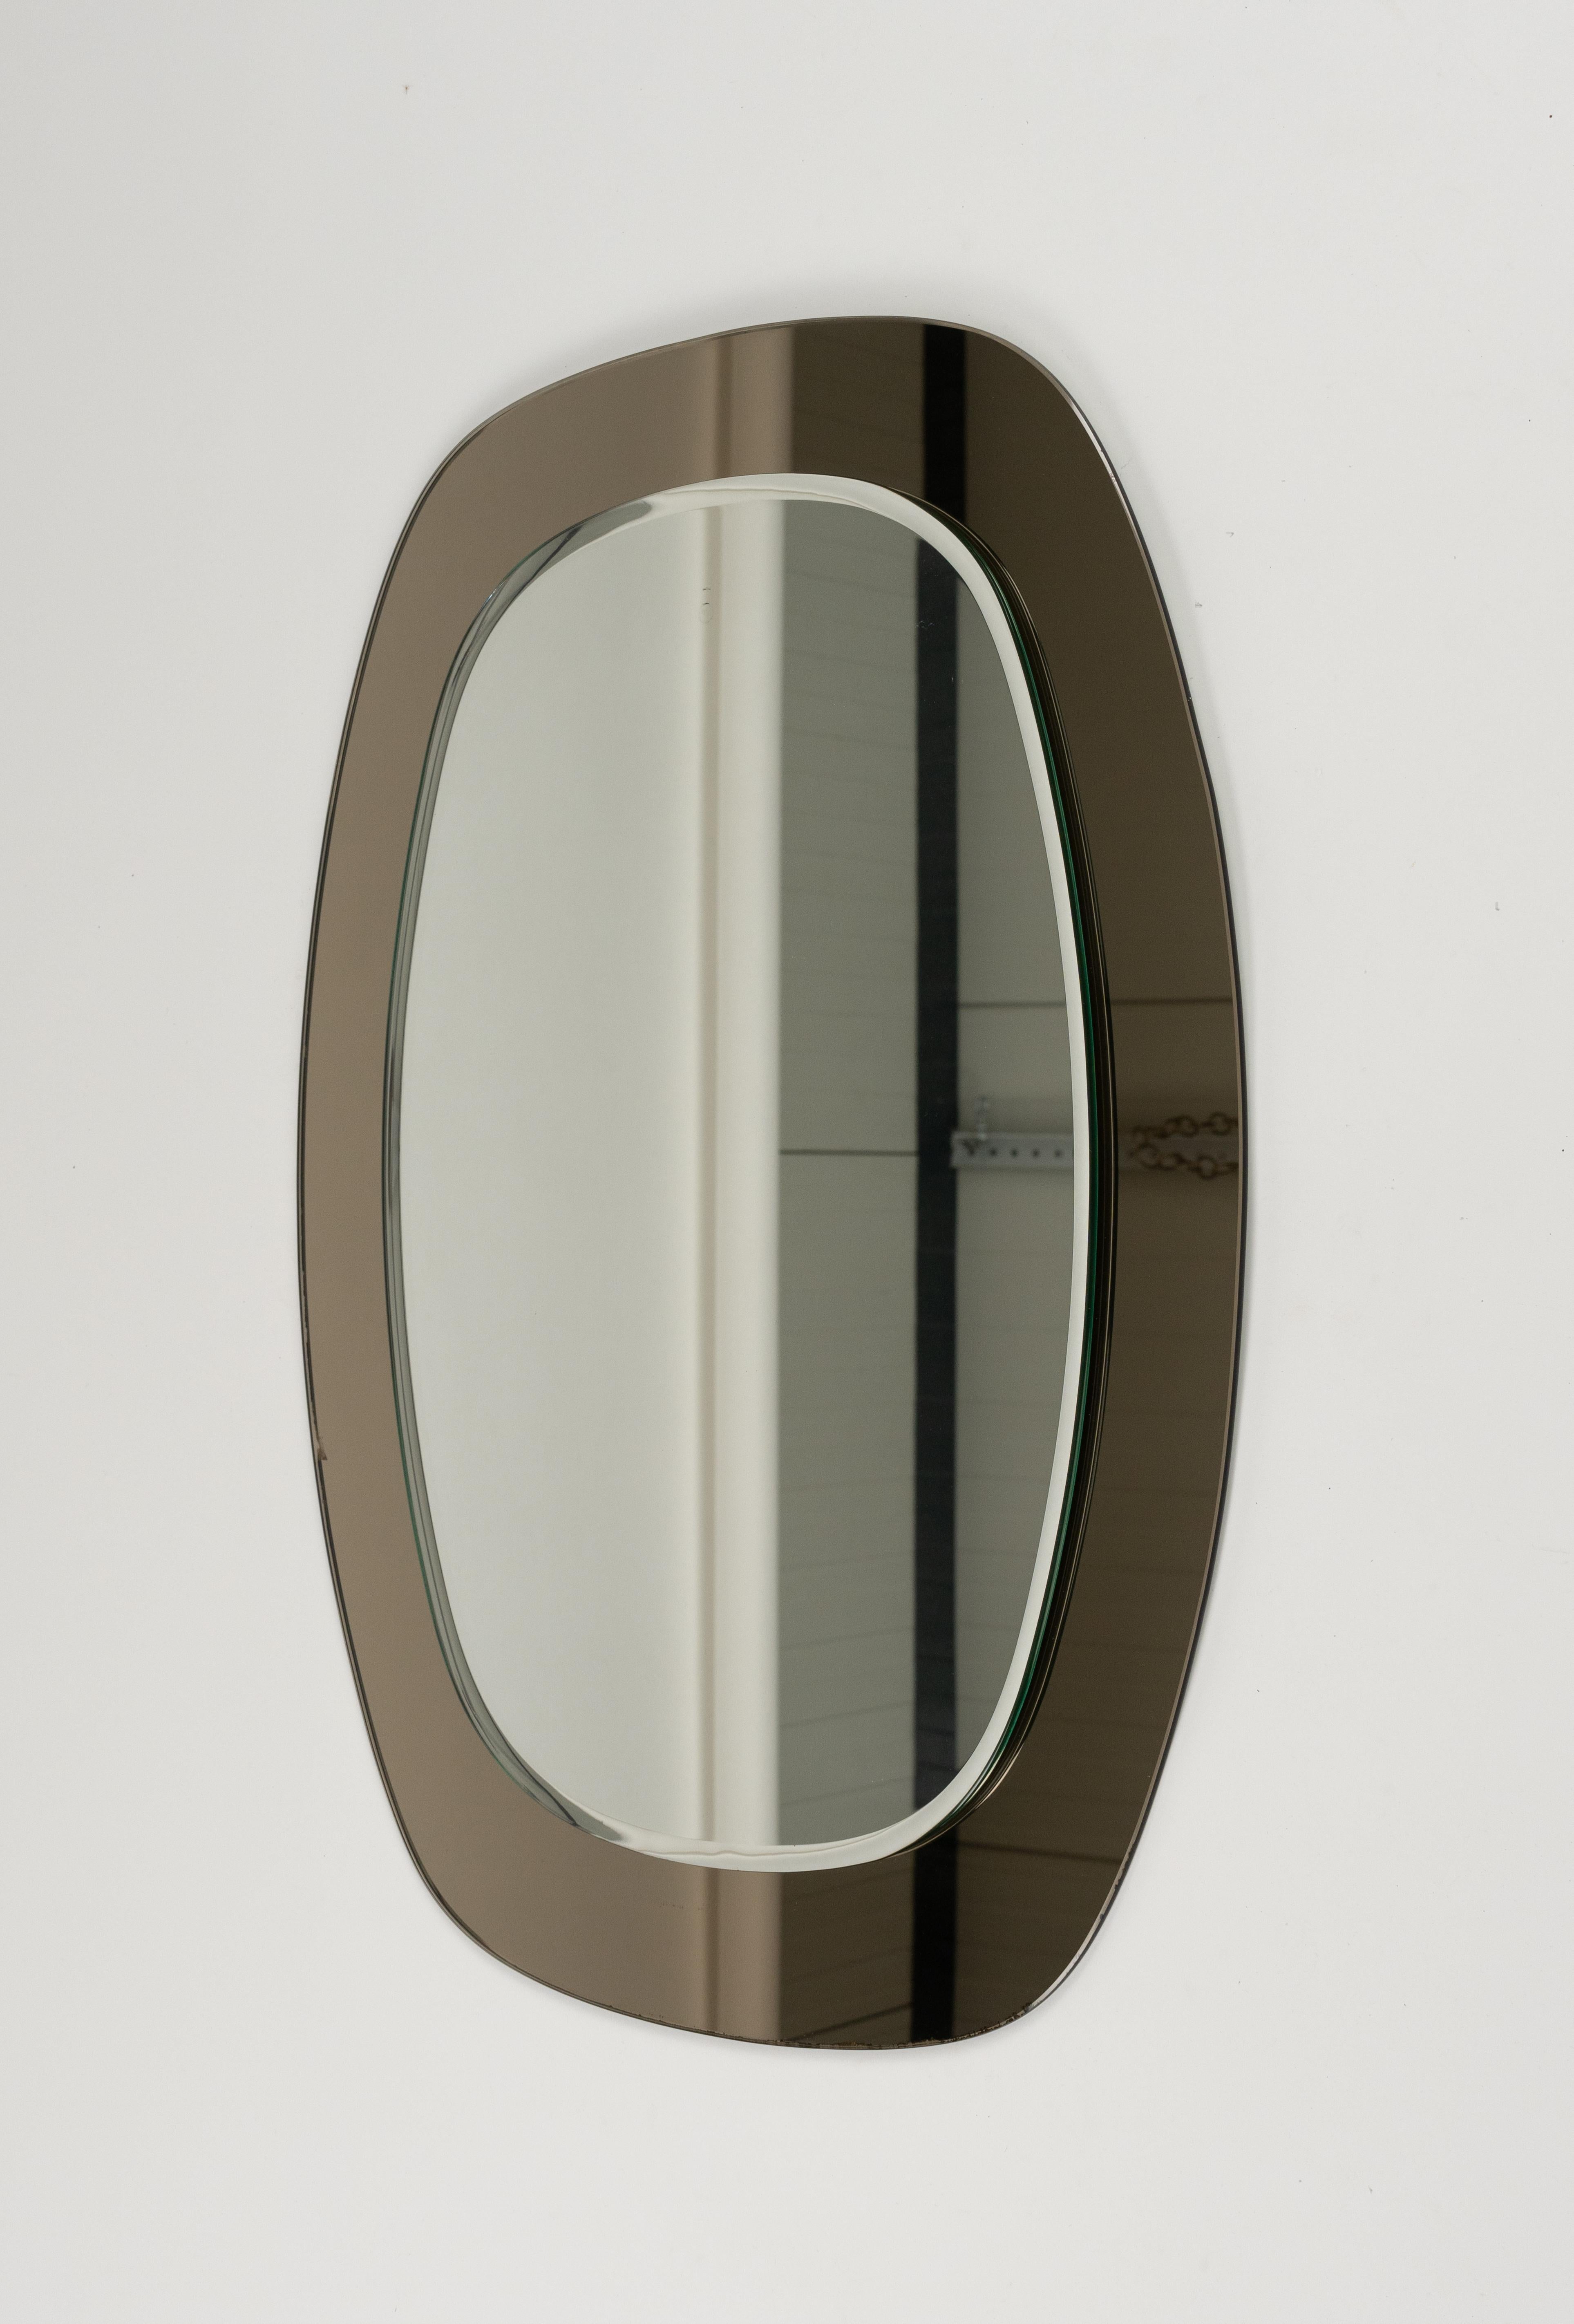 Midcentury Cristal Art Oval Wall Mirror with Smoked Frame, Italy 1960s For Sale 4